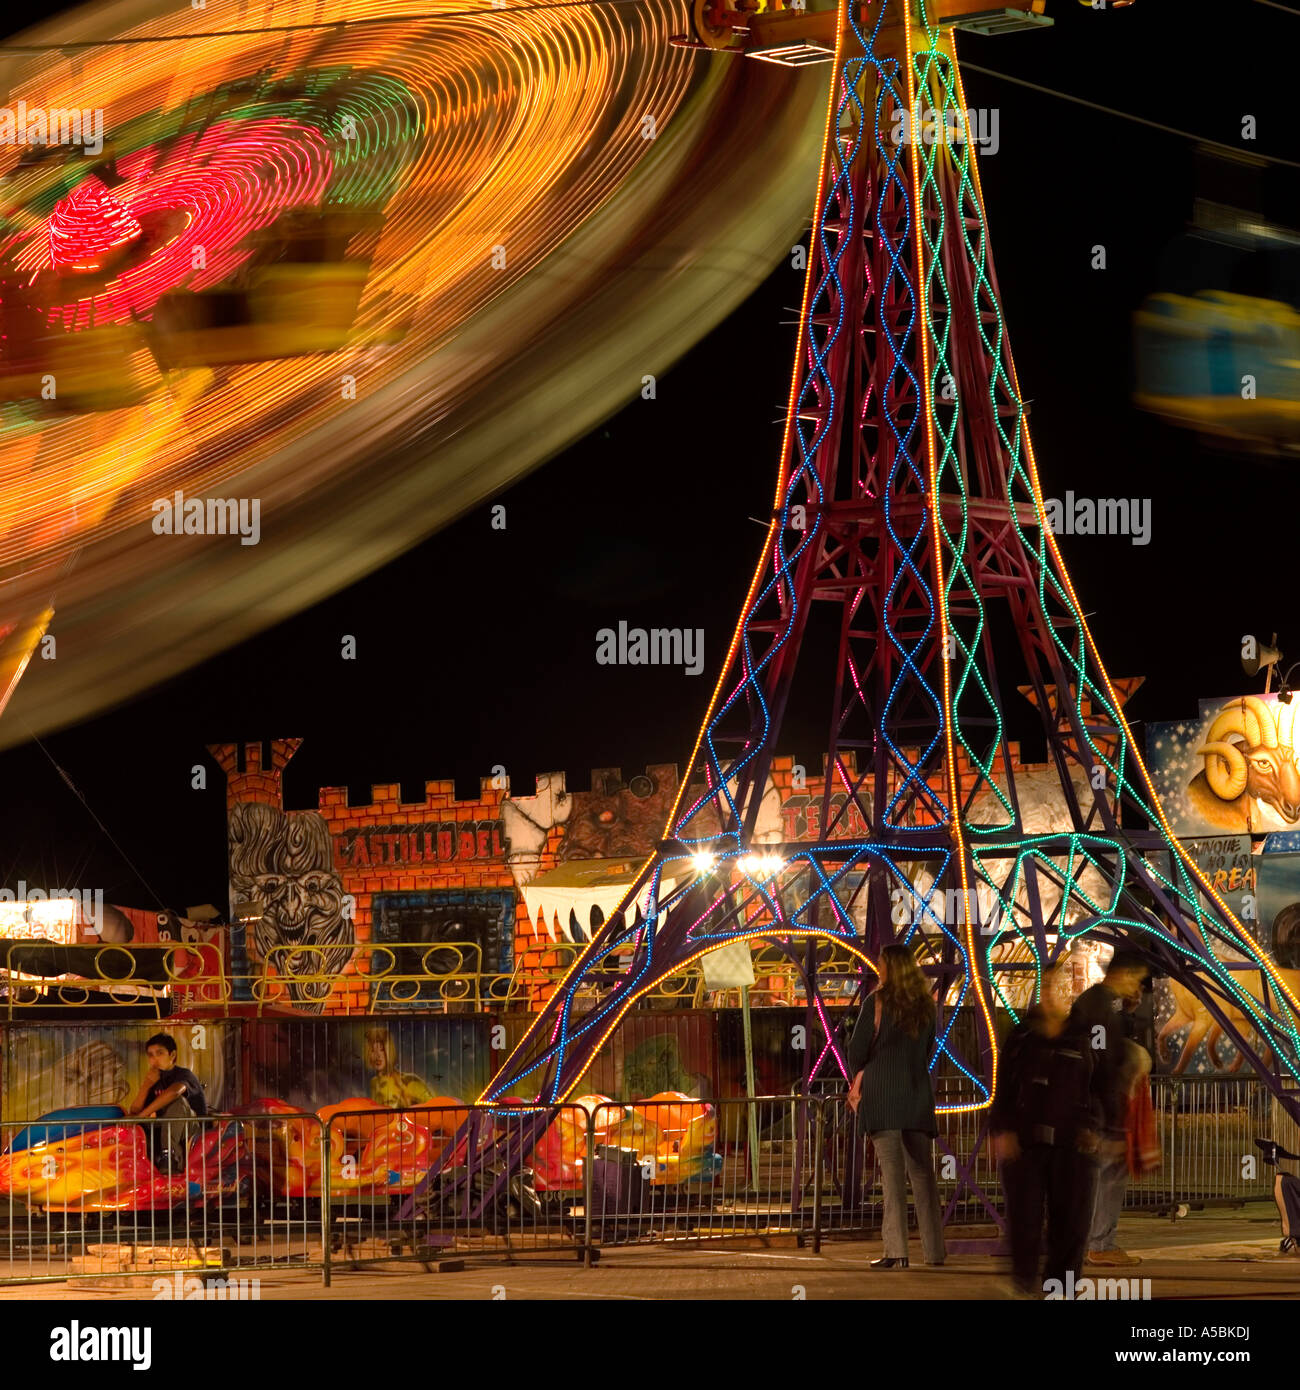 fairground spinning wheel at night time with Eiffel tower look alike pylon surreal weird unusual image concept Stock Photo